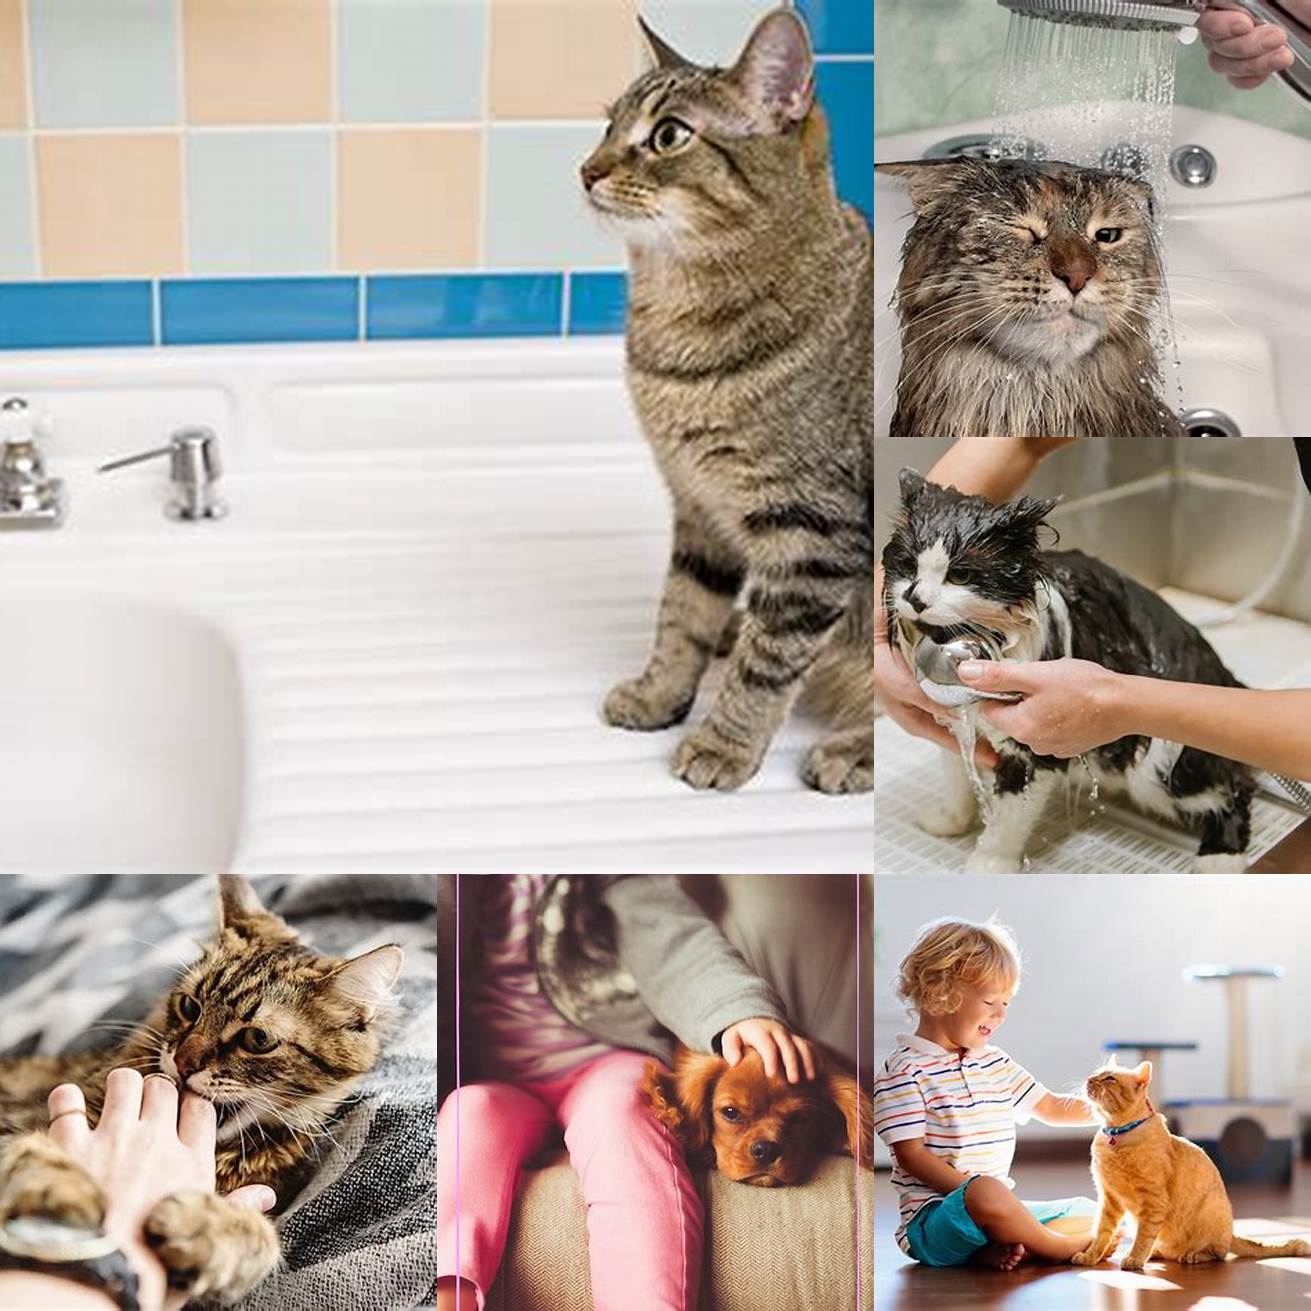 Person washing hands after petting a cat